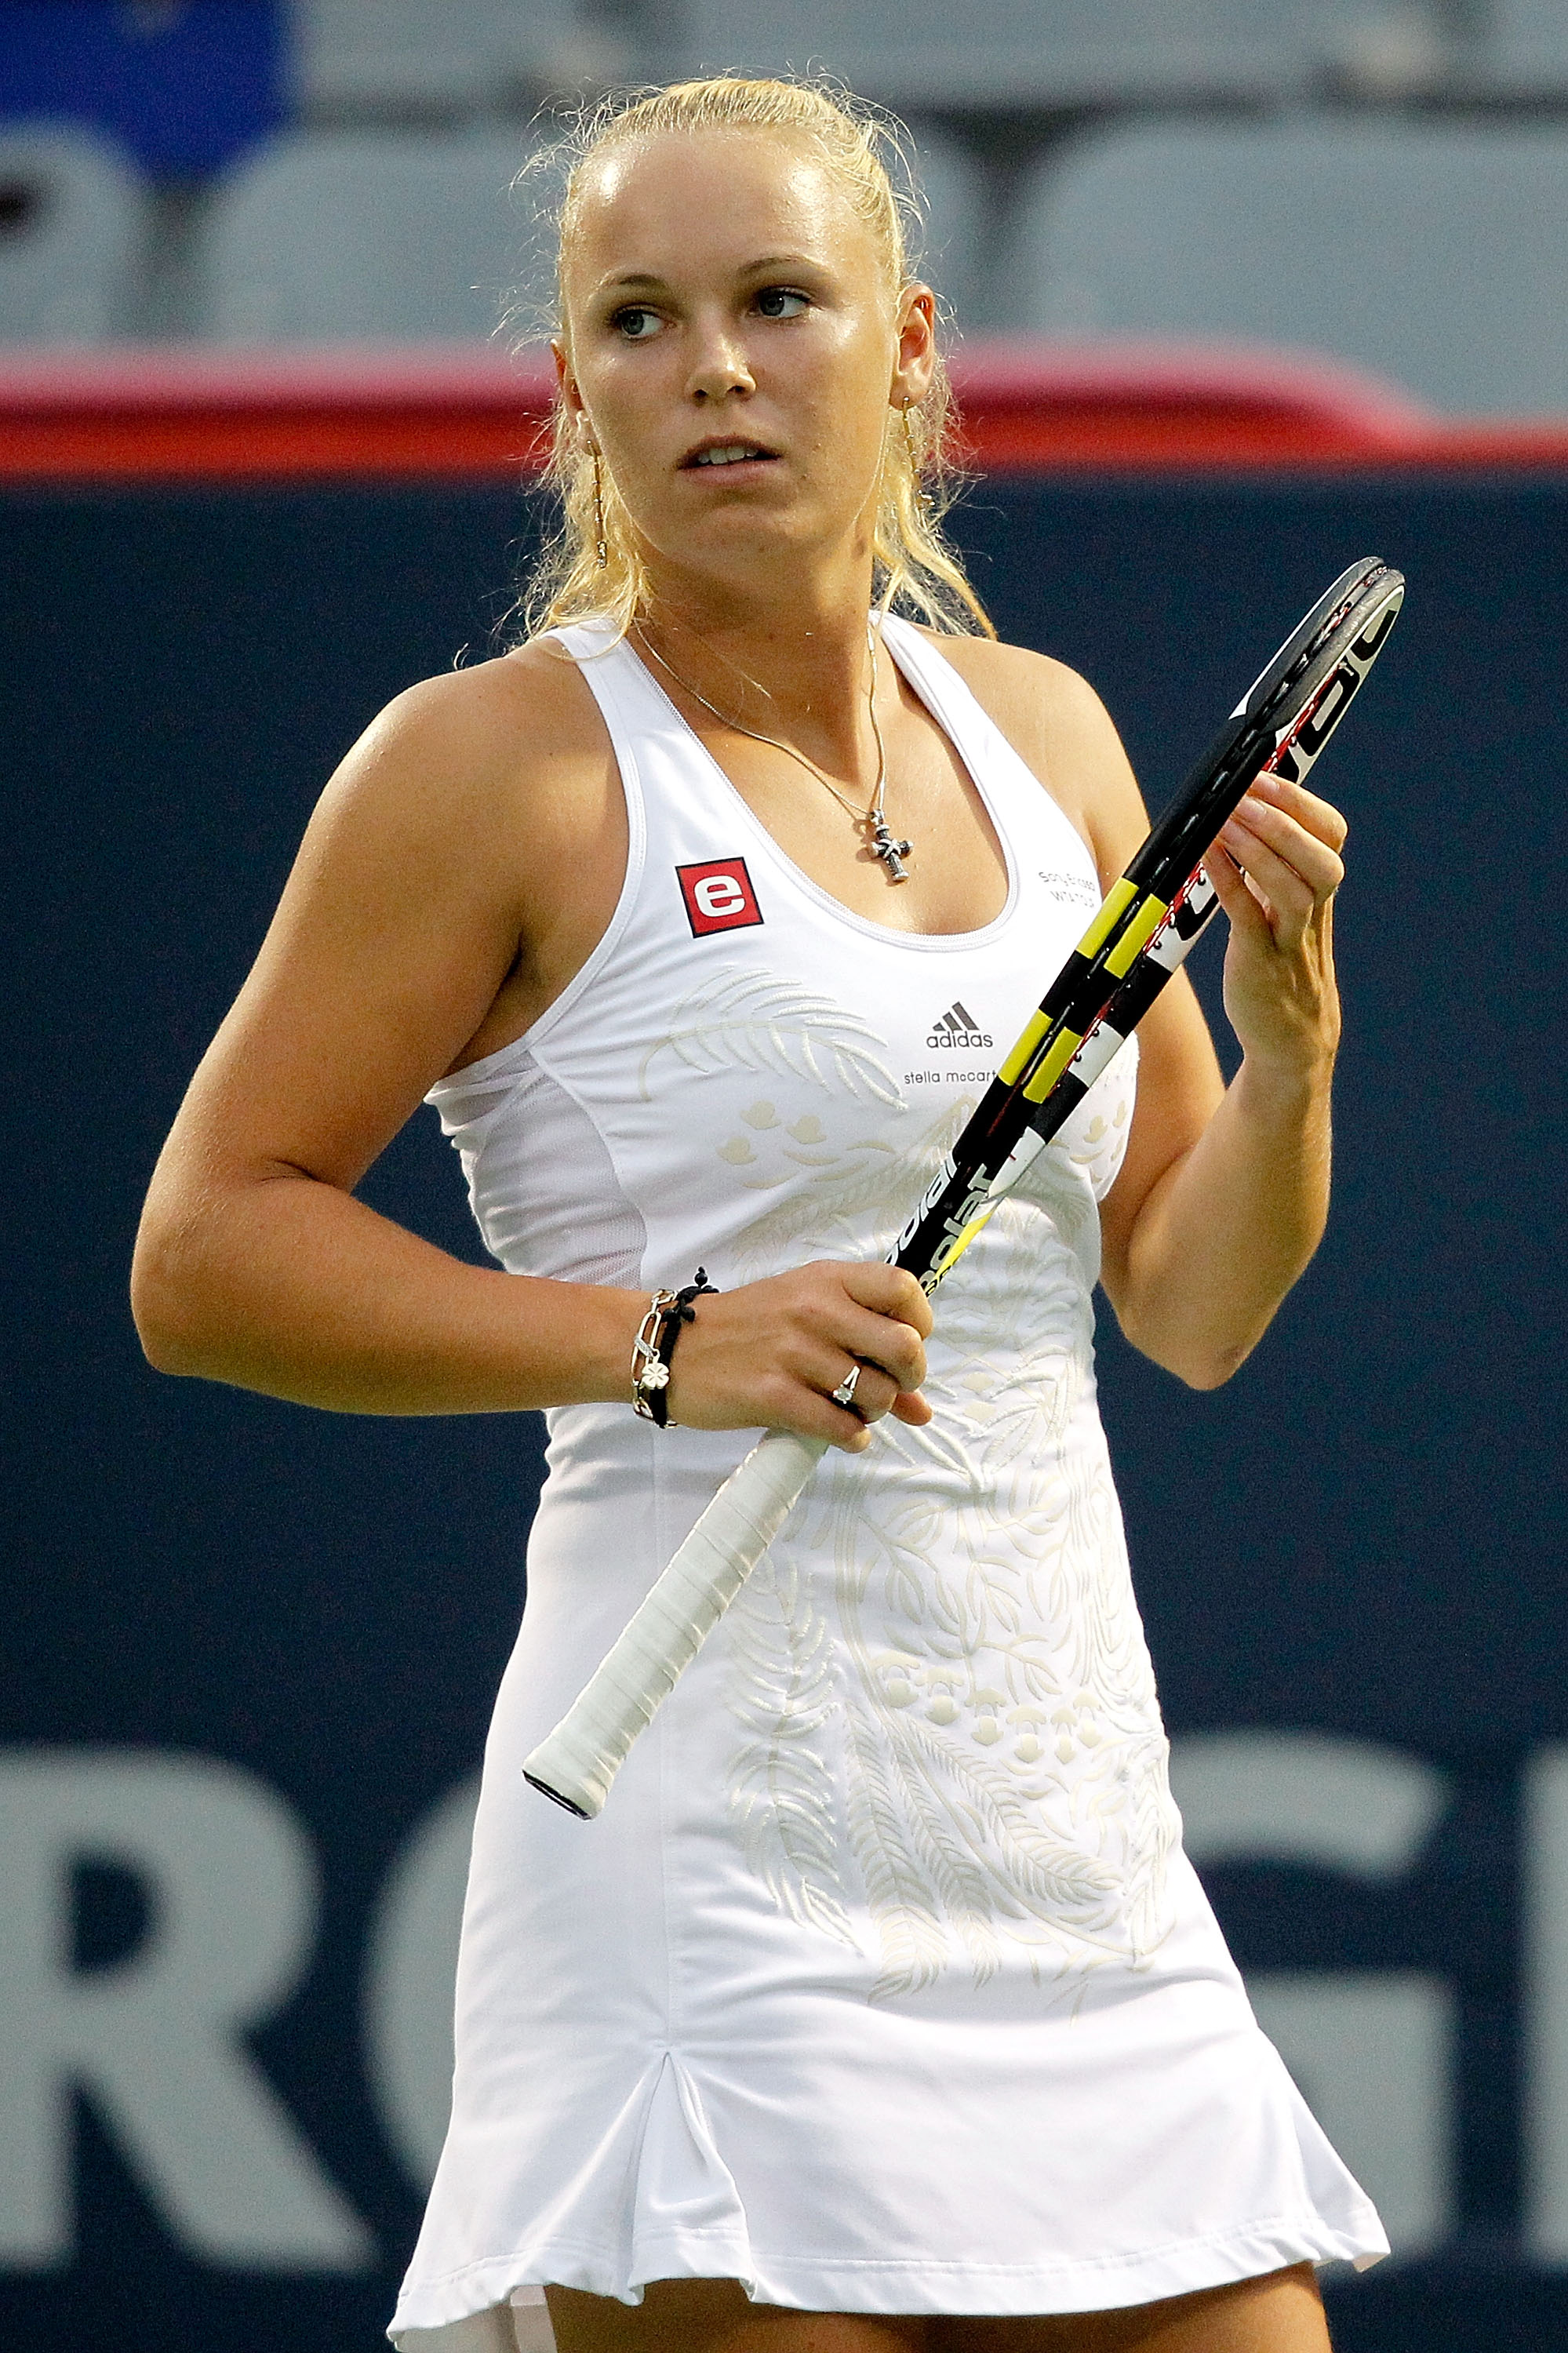 MONTREAL, QC - AUGUST 21:  Caroline Wozniacki of Denmark adjusts her racquet between points while playing Svetlana Kuznetsova of Russia during the semifinals of the Rogers Cup at Stade Uniprix on August 21, 2010 in Montreal, Canada.  (Photo by Matthew Sto